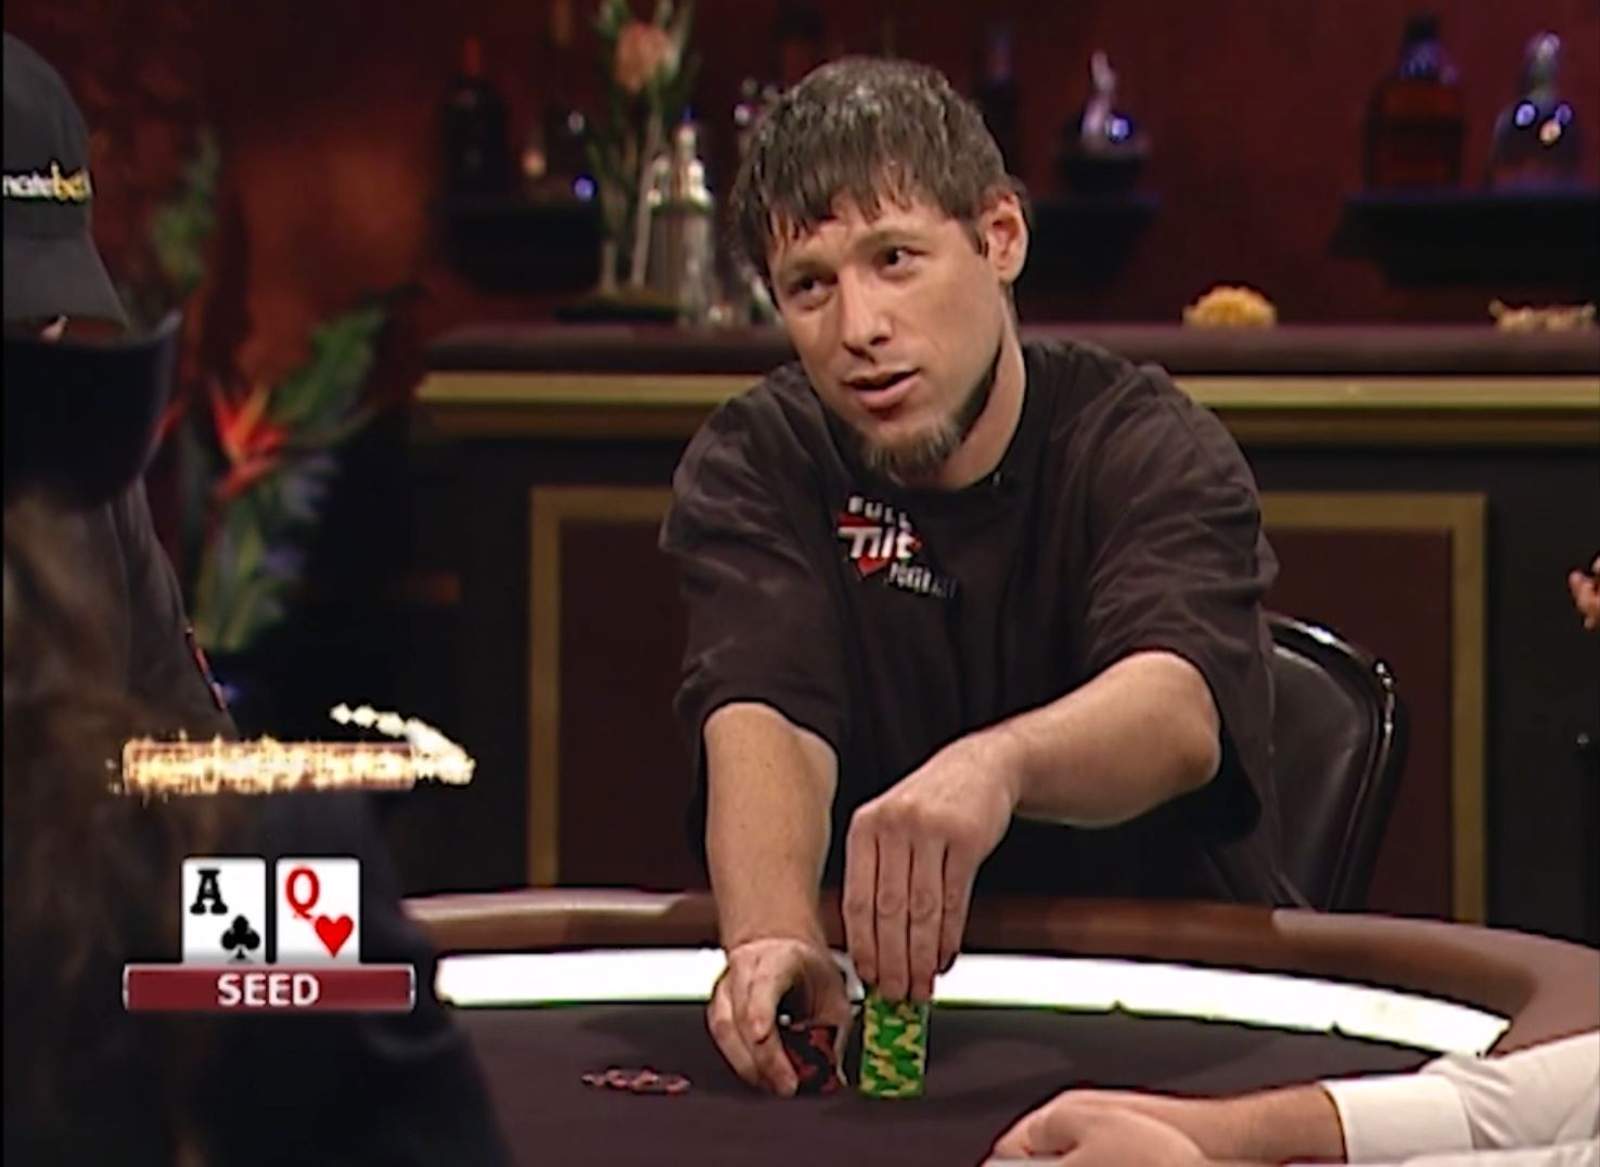 Poker After Dark: Season 3 Pits World Champs Against Each Other